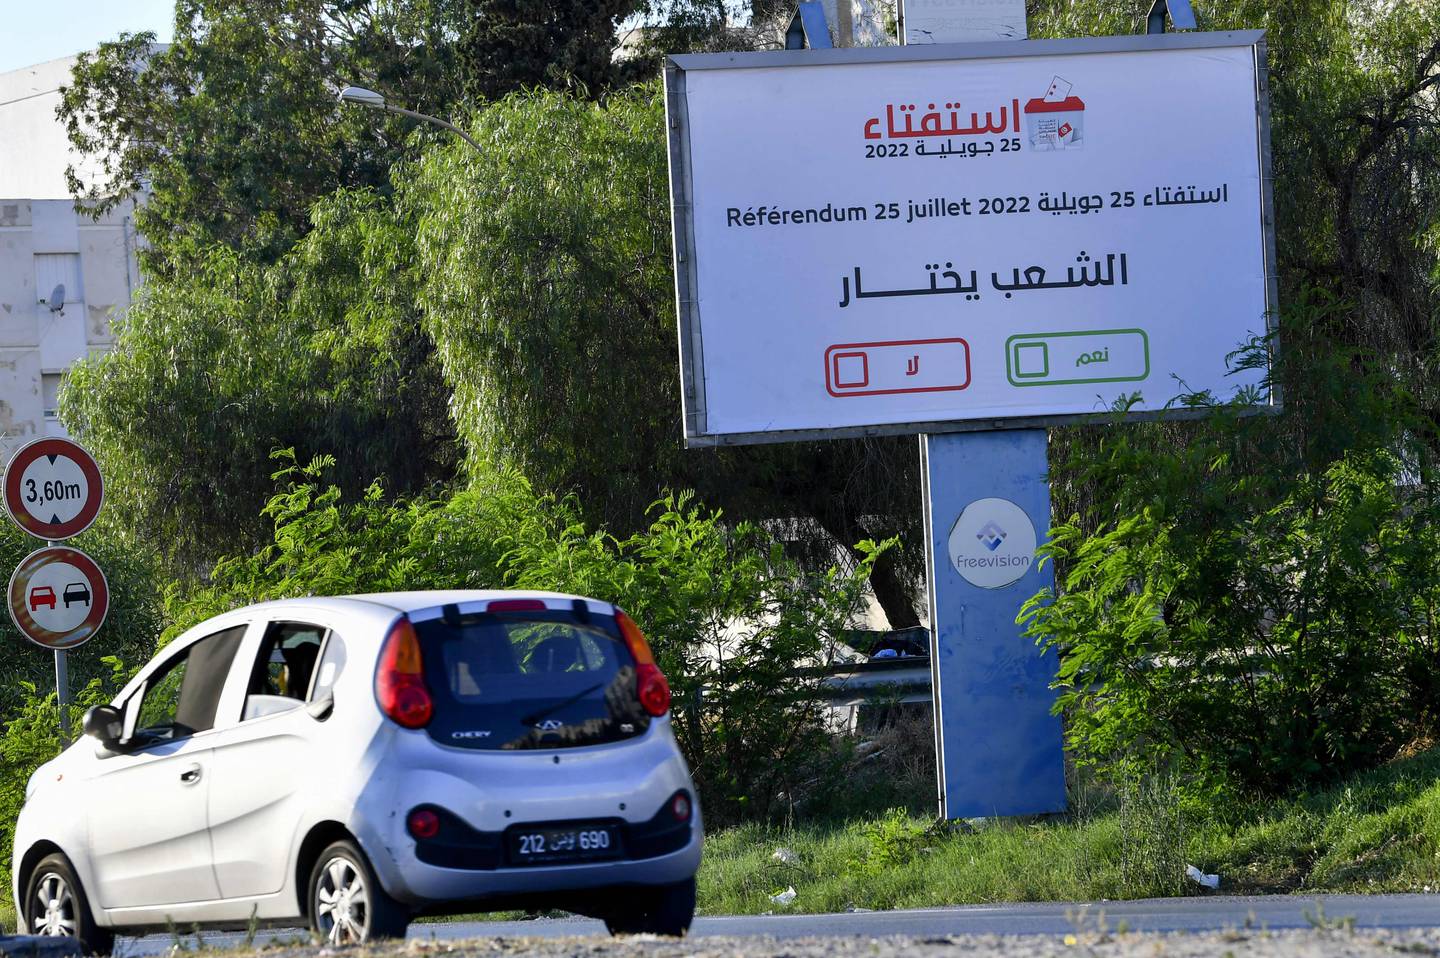 A billboard in Tunis urging Tunisians to vote in the July 25 constitutional referendum. AFP